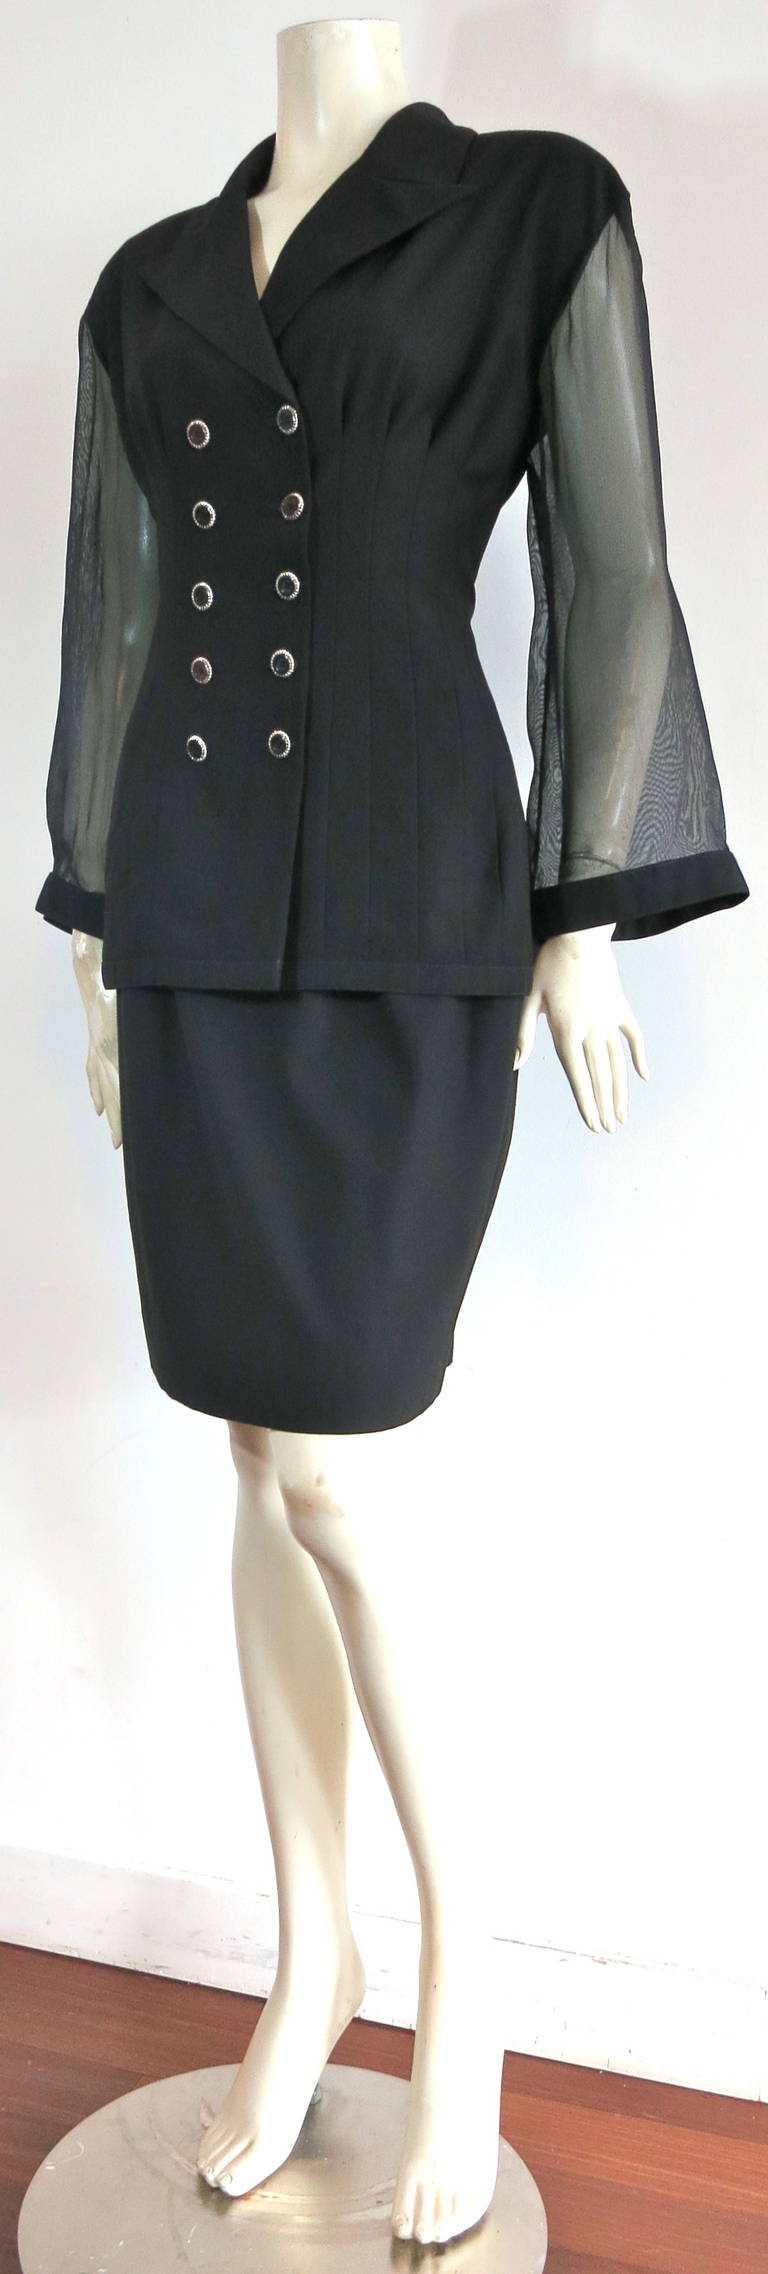 1980's KARL LAGERFELD Black skirt suit with sheer sleeves For Sale 1